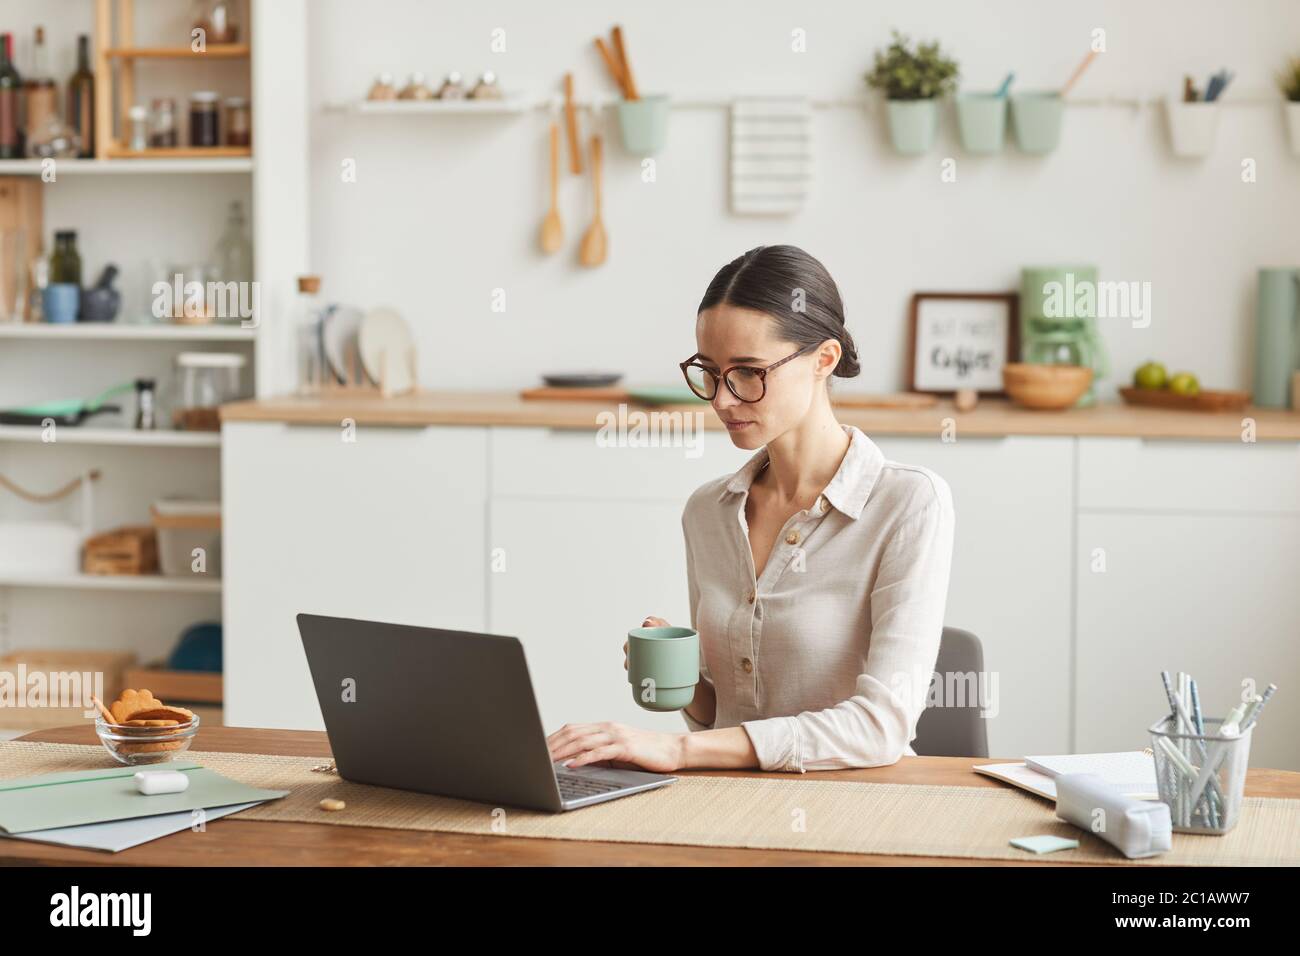 Portrait of elegant businesswoman drinking coffee while using laptop at cozy home office workplace, copy space Stock Photo